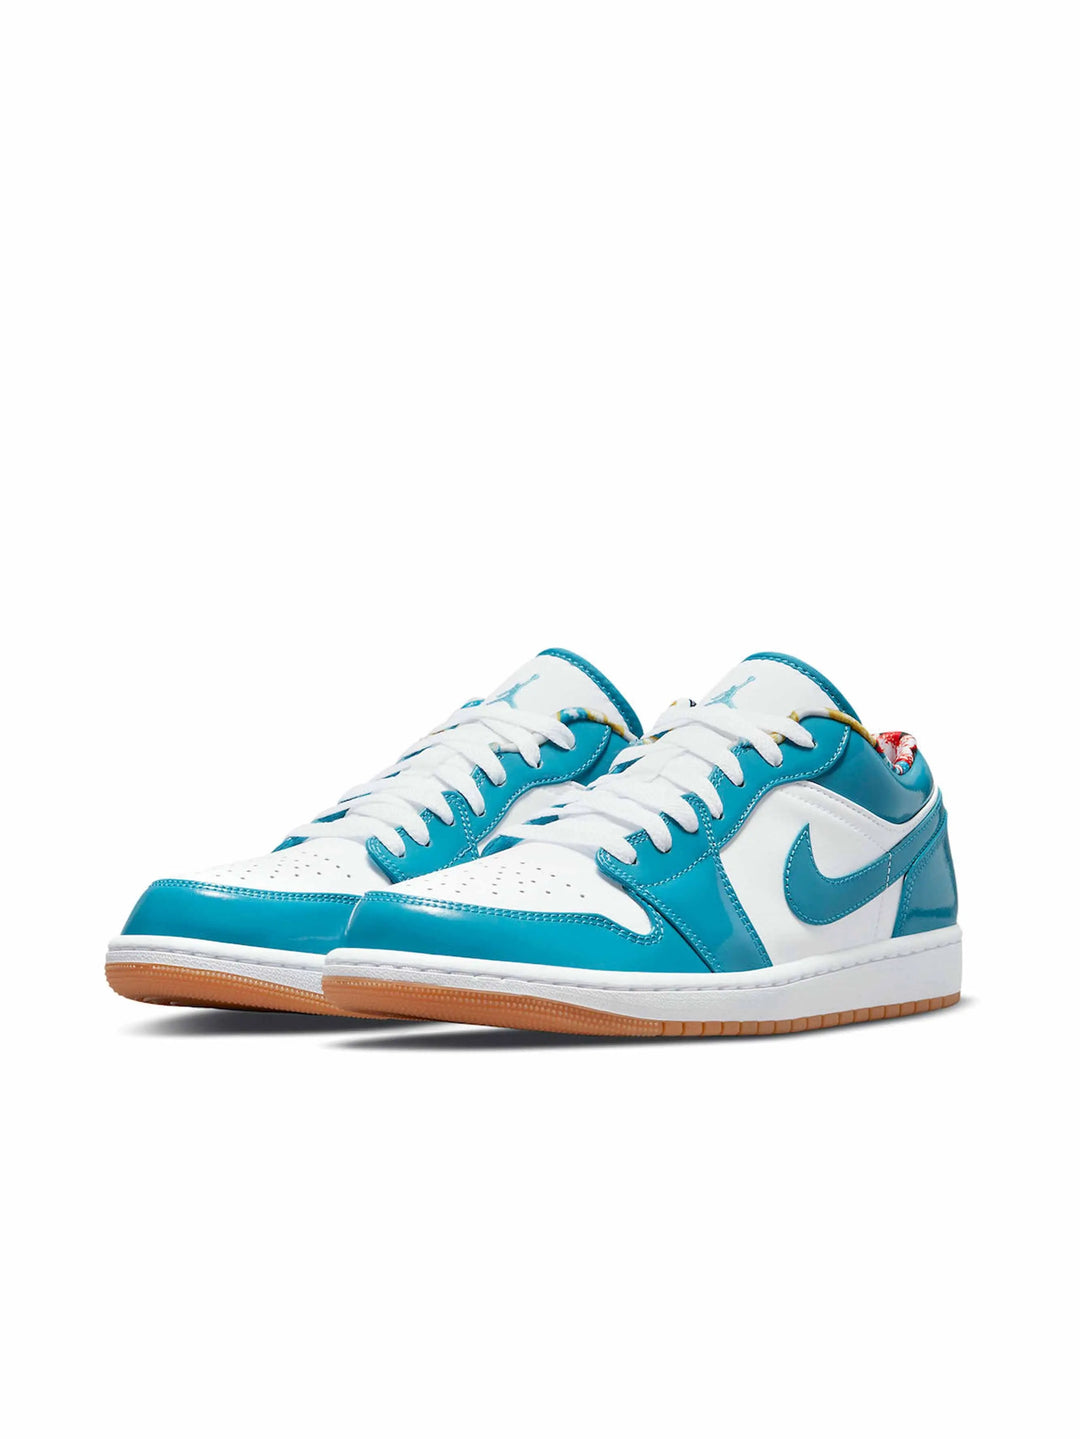 Nike Air Jordan 1 Low SE Barcelona Cyber Teal in Auckland, New Zealand - Shop name